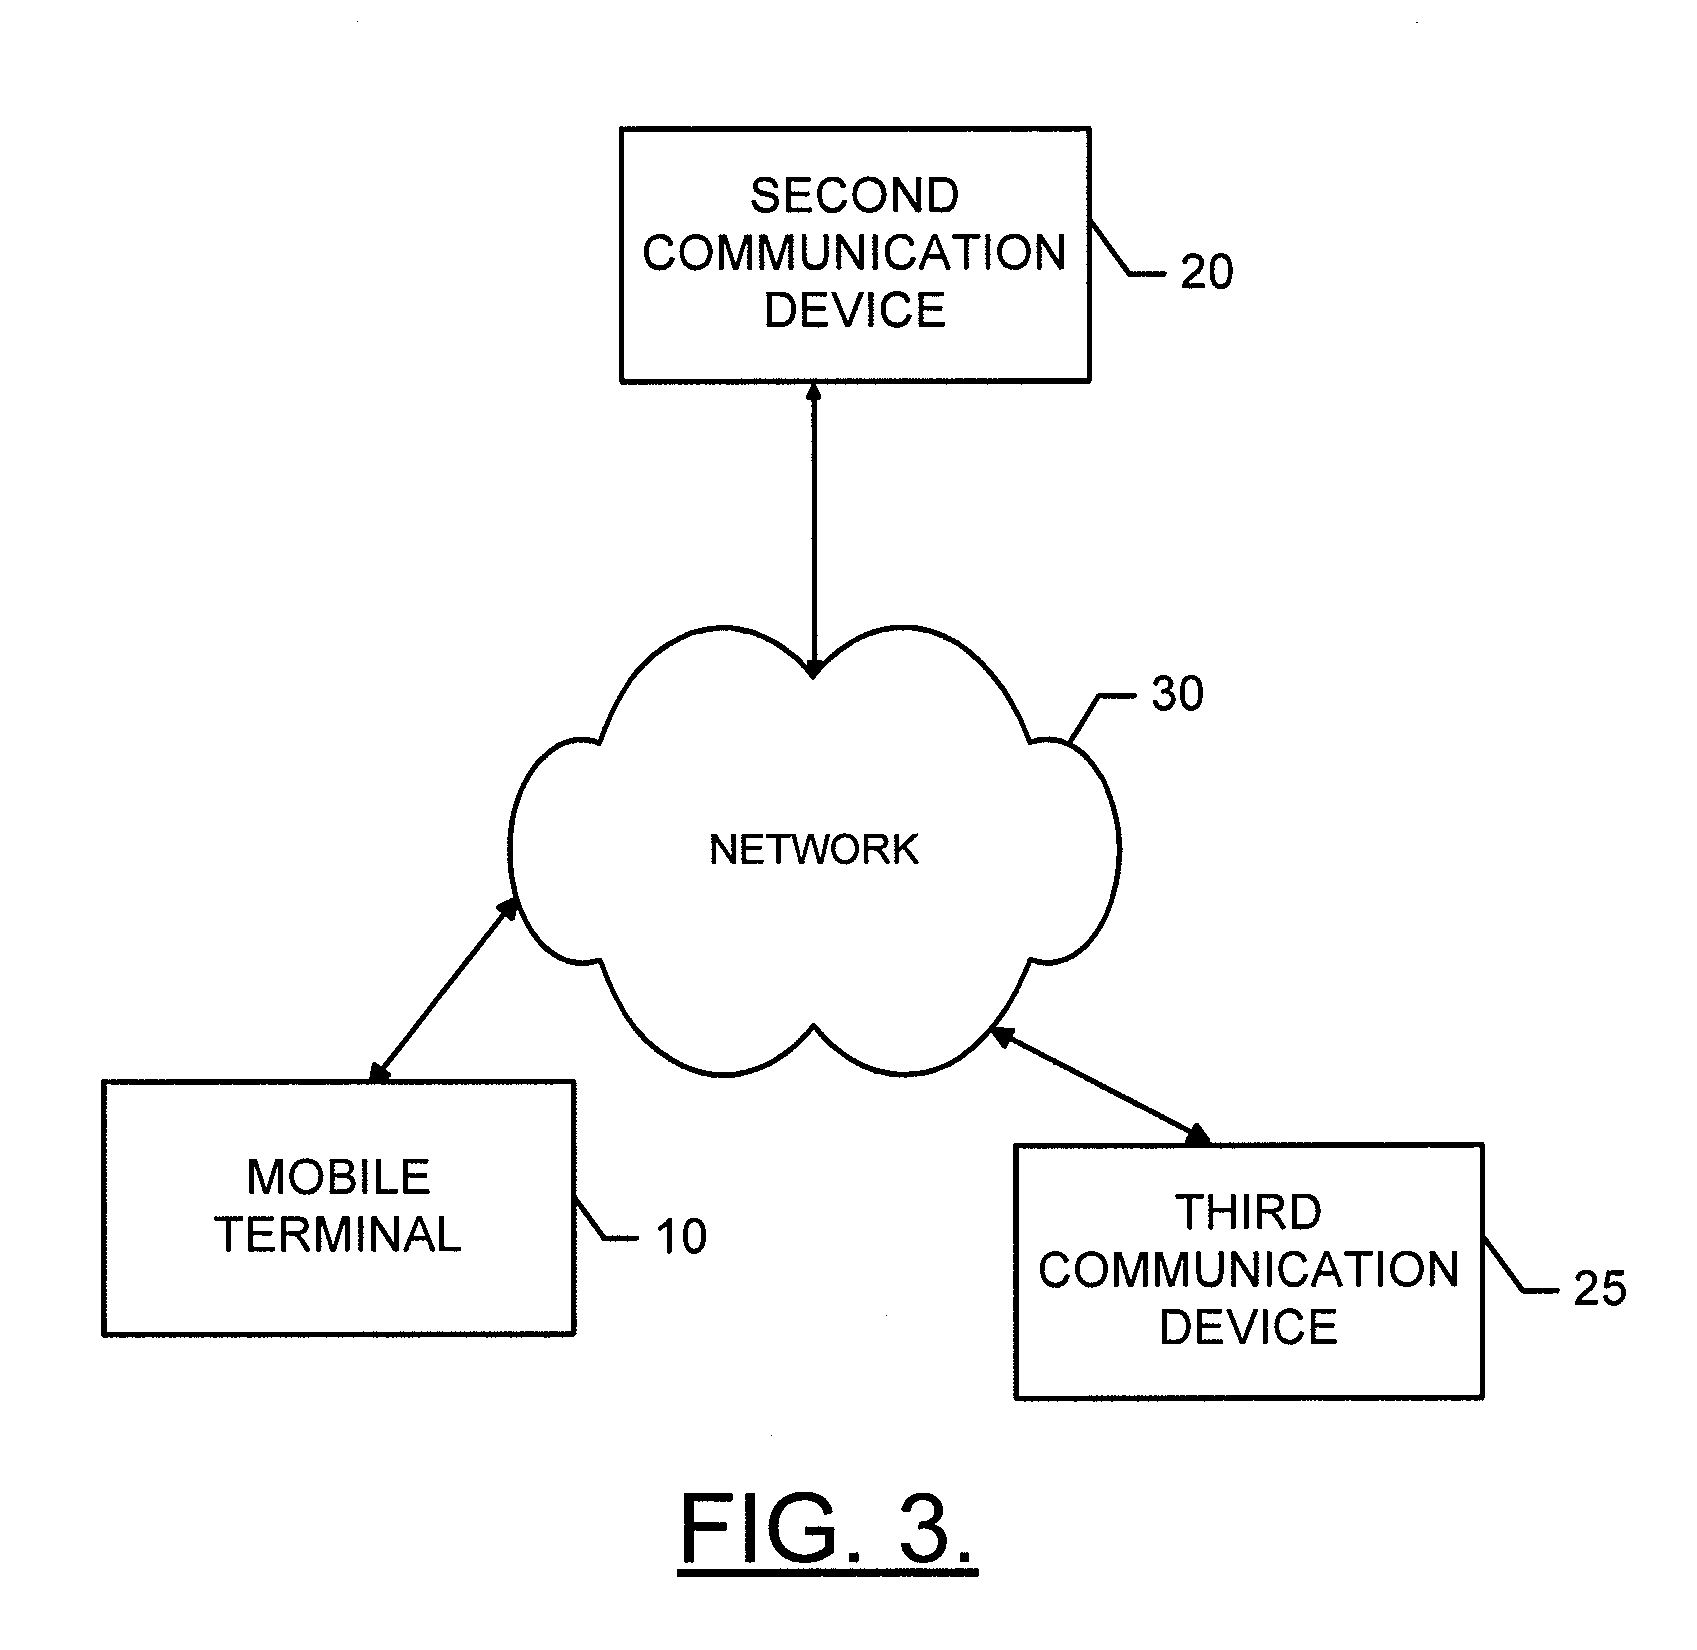 Methods, apparatuses and computer program products for facilitating efficient browsing and selection of media content & lowering computational load for processing audio data